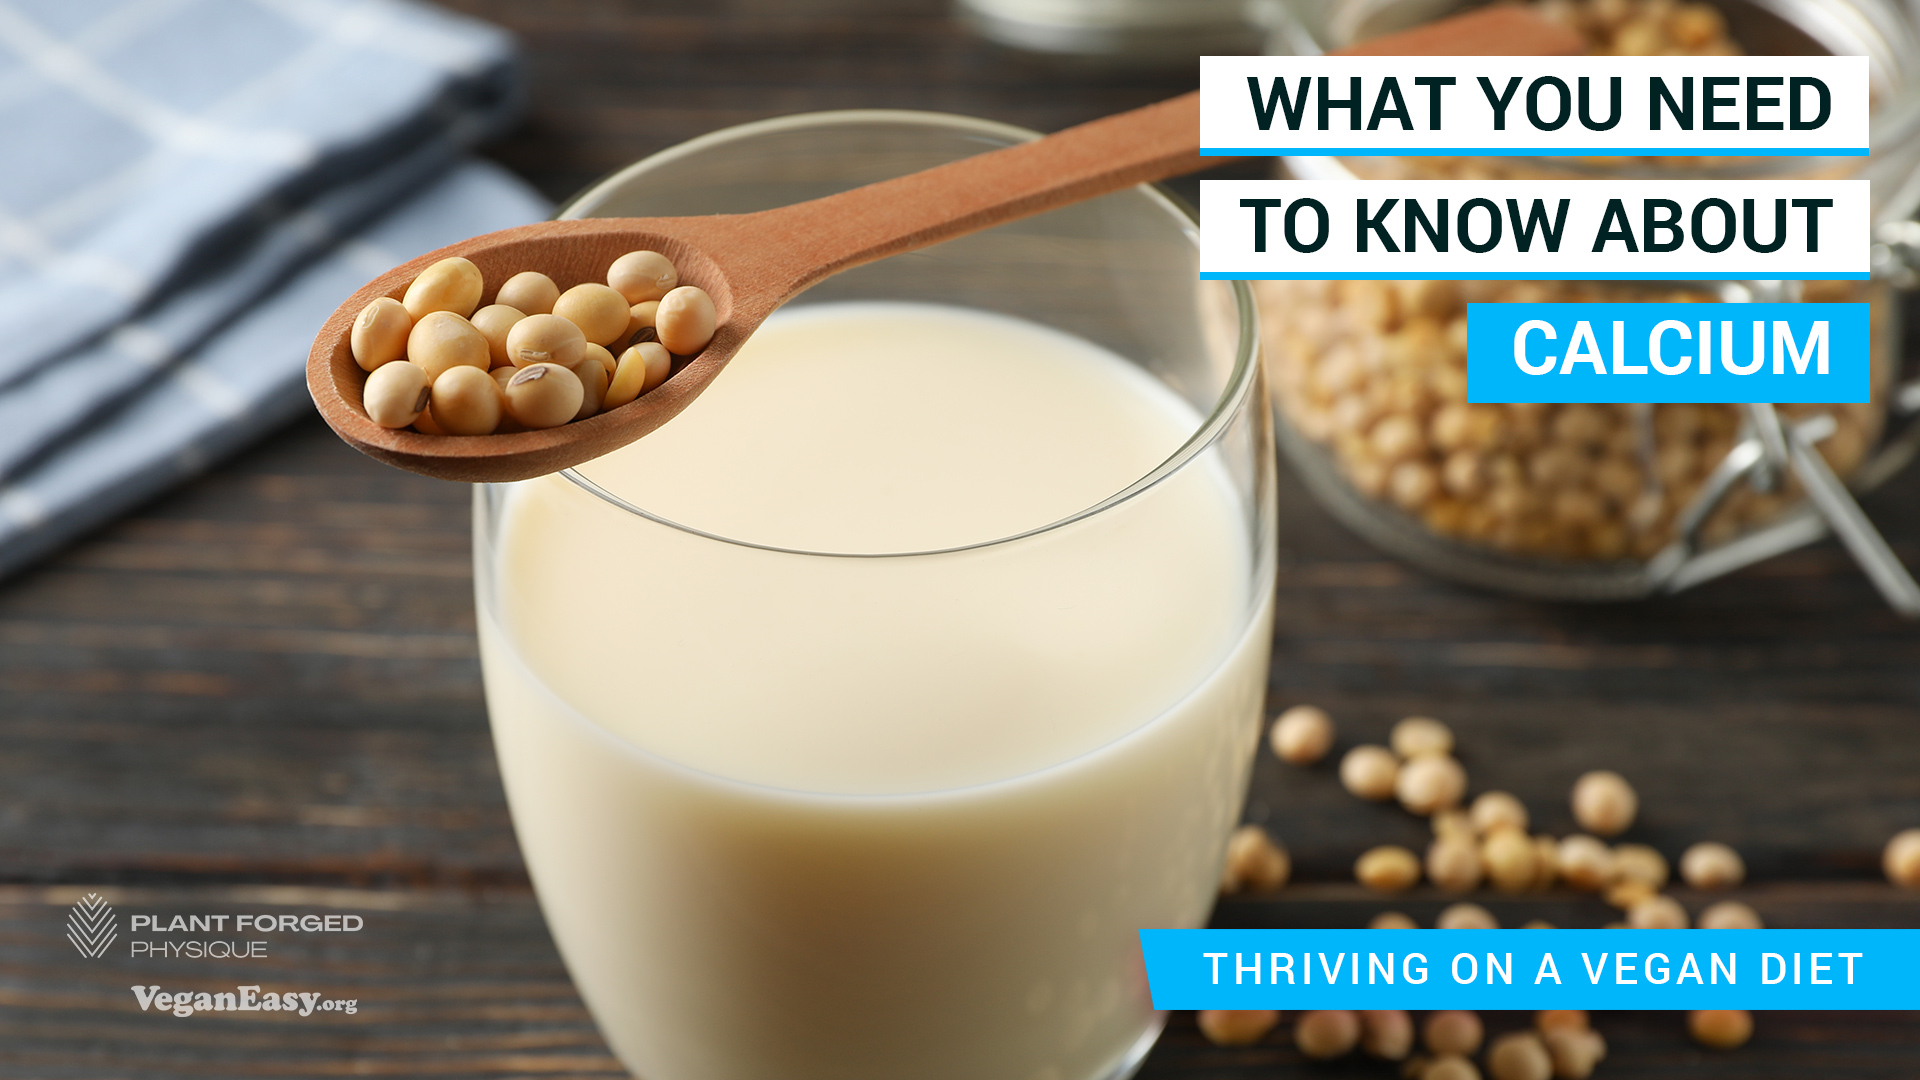 What you need to know about Calcium